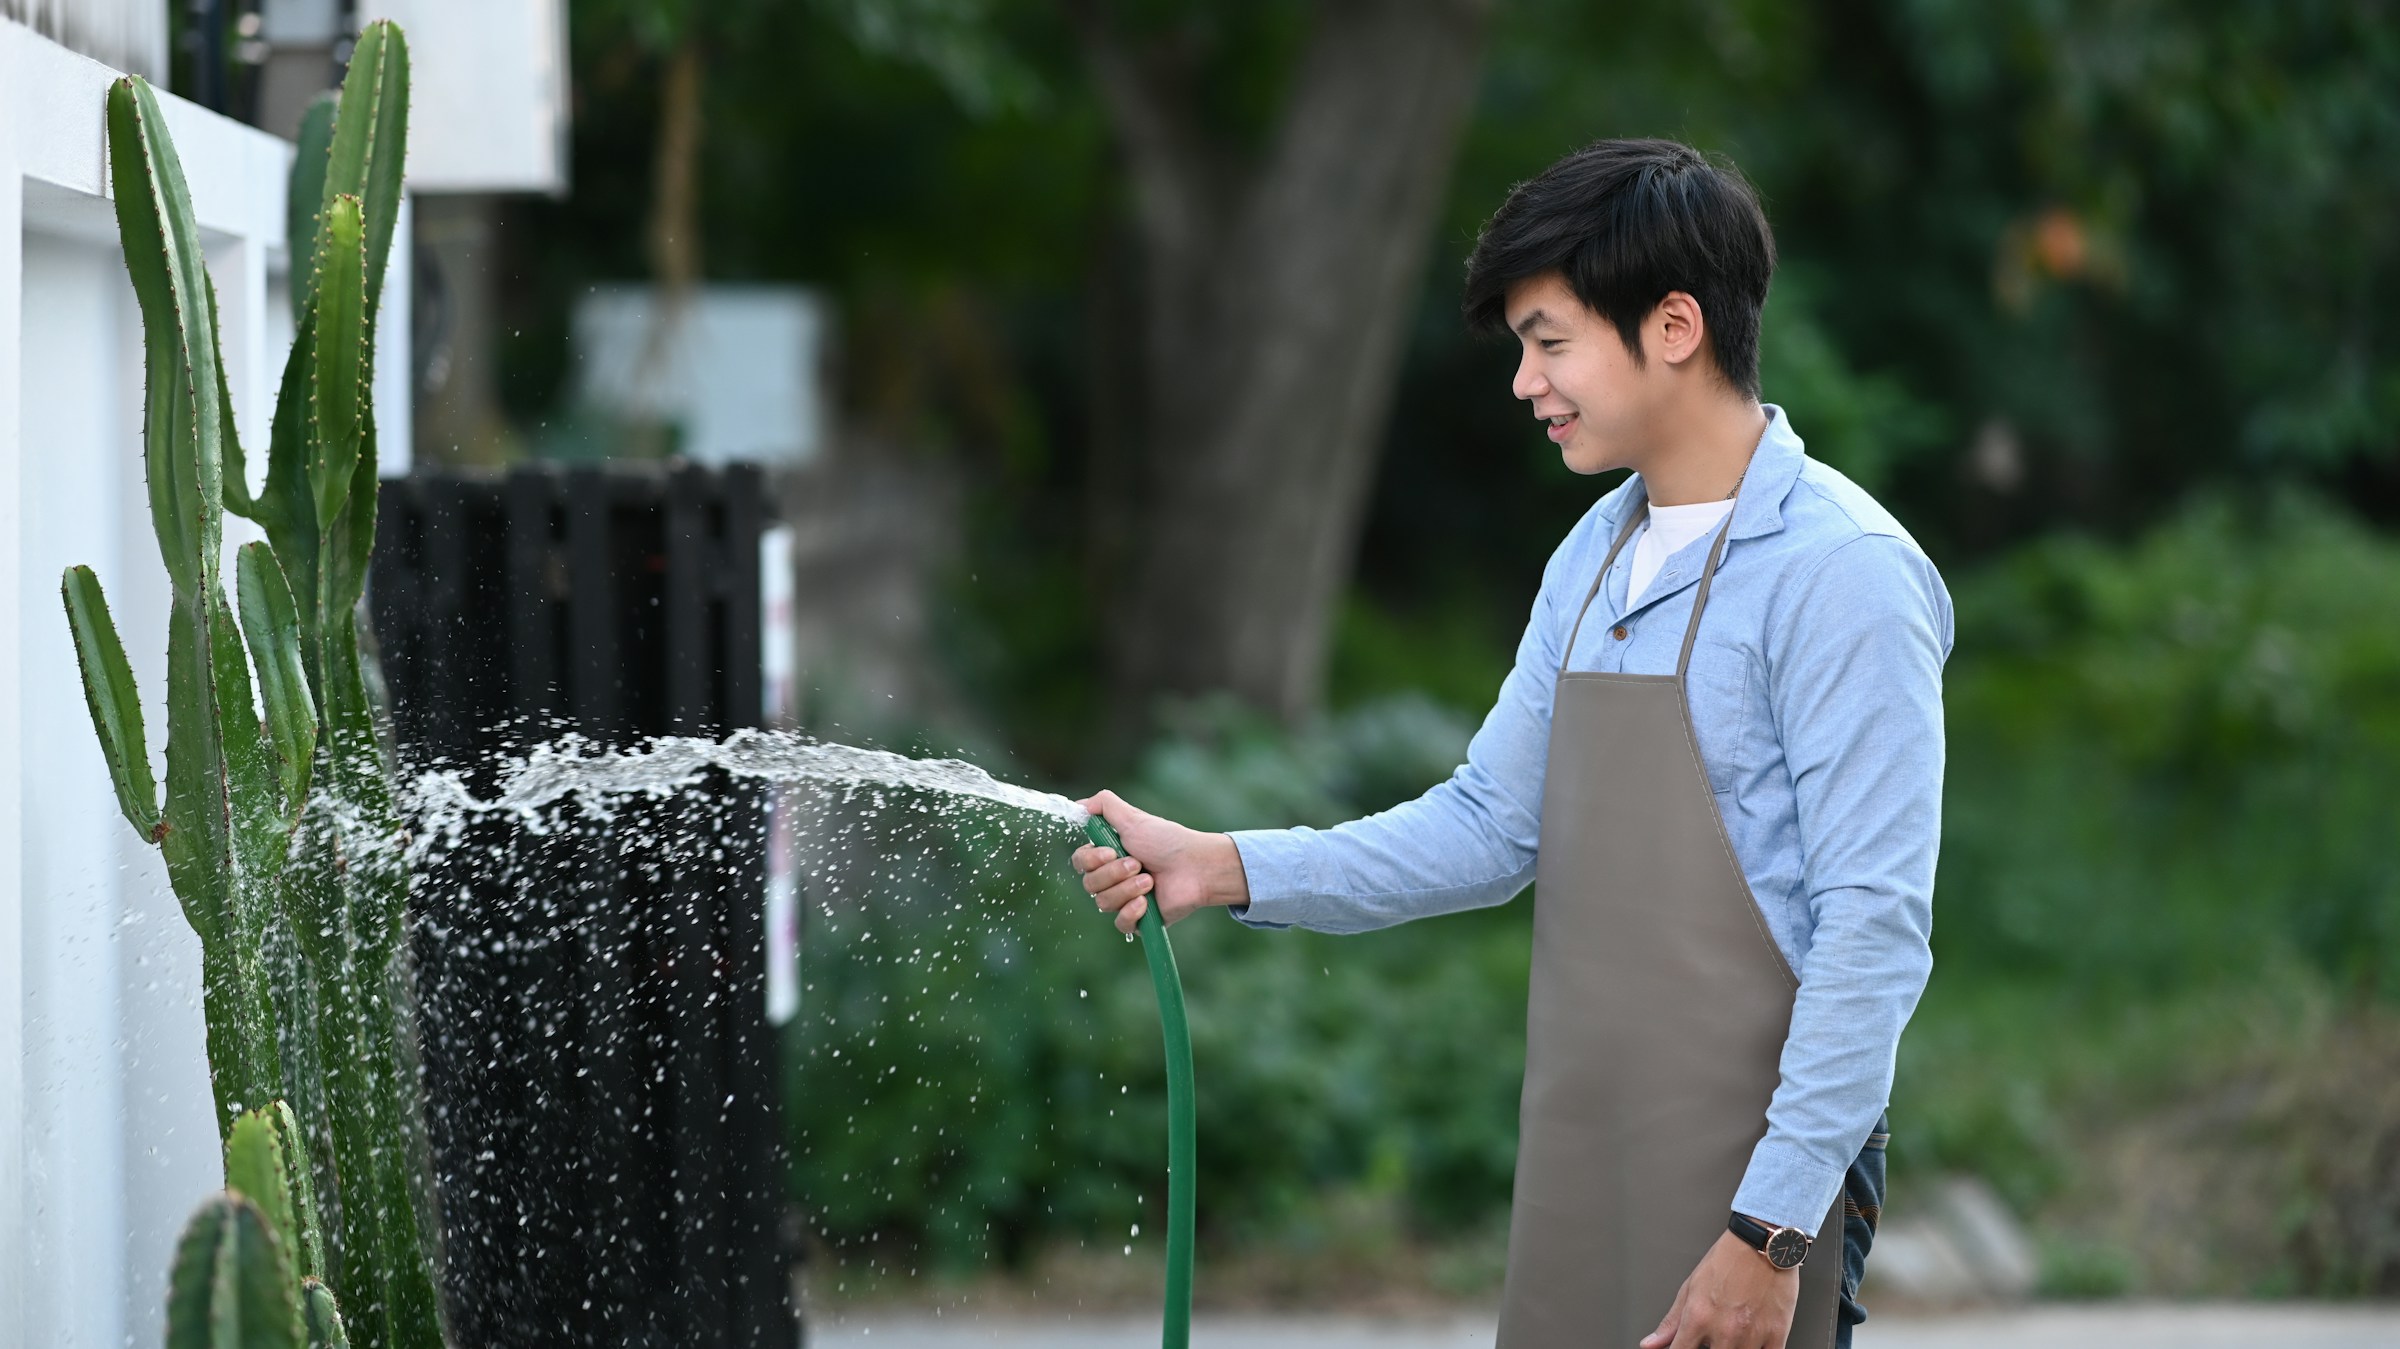 A person wearing an apron waters plants with a hose in a garden setting, applying nutrients through EZ-FLO fertigation.